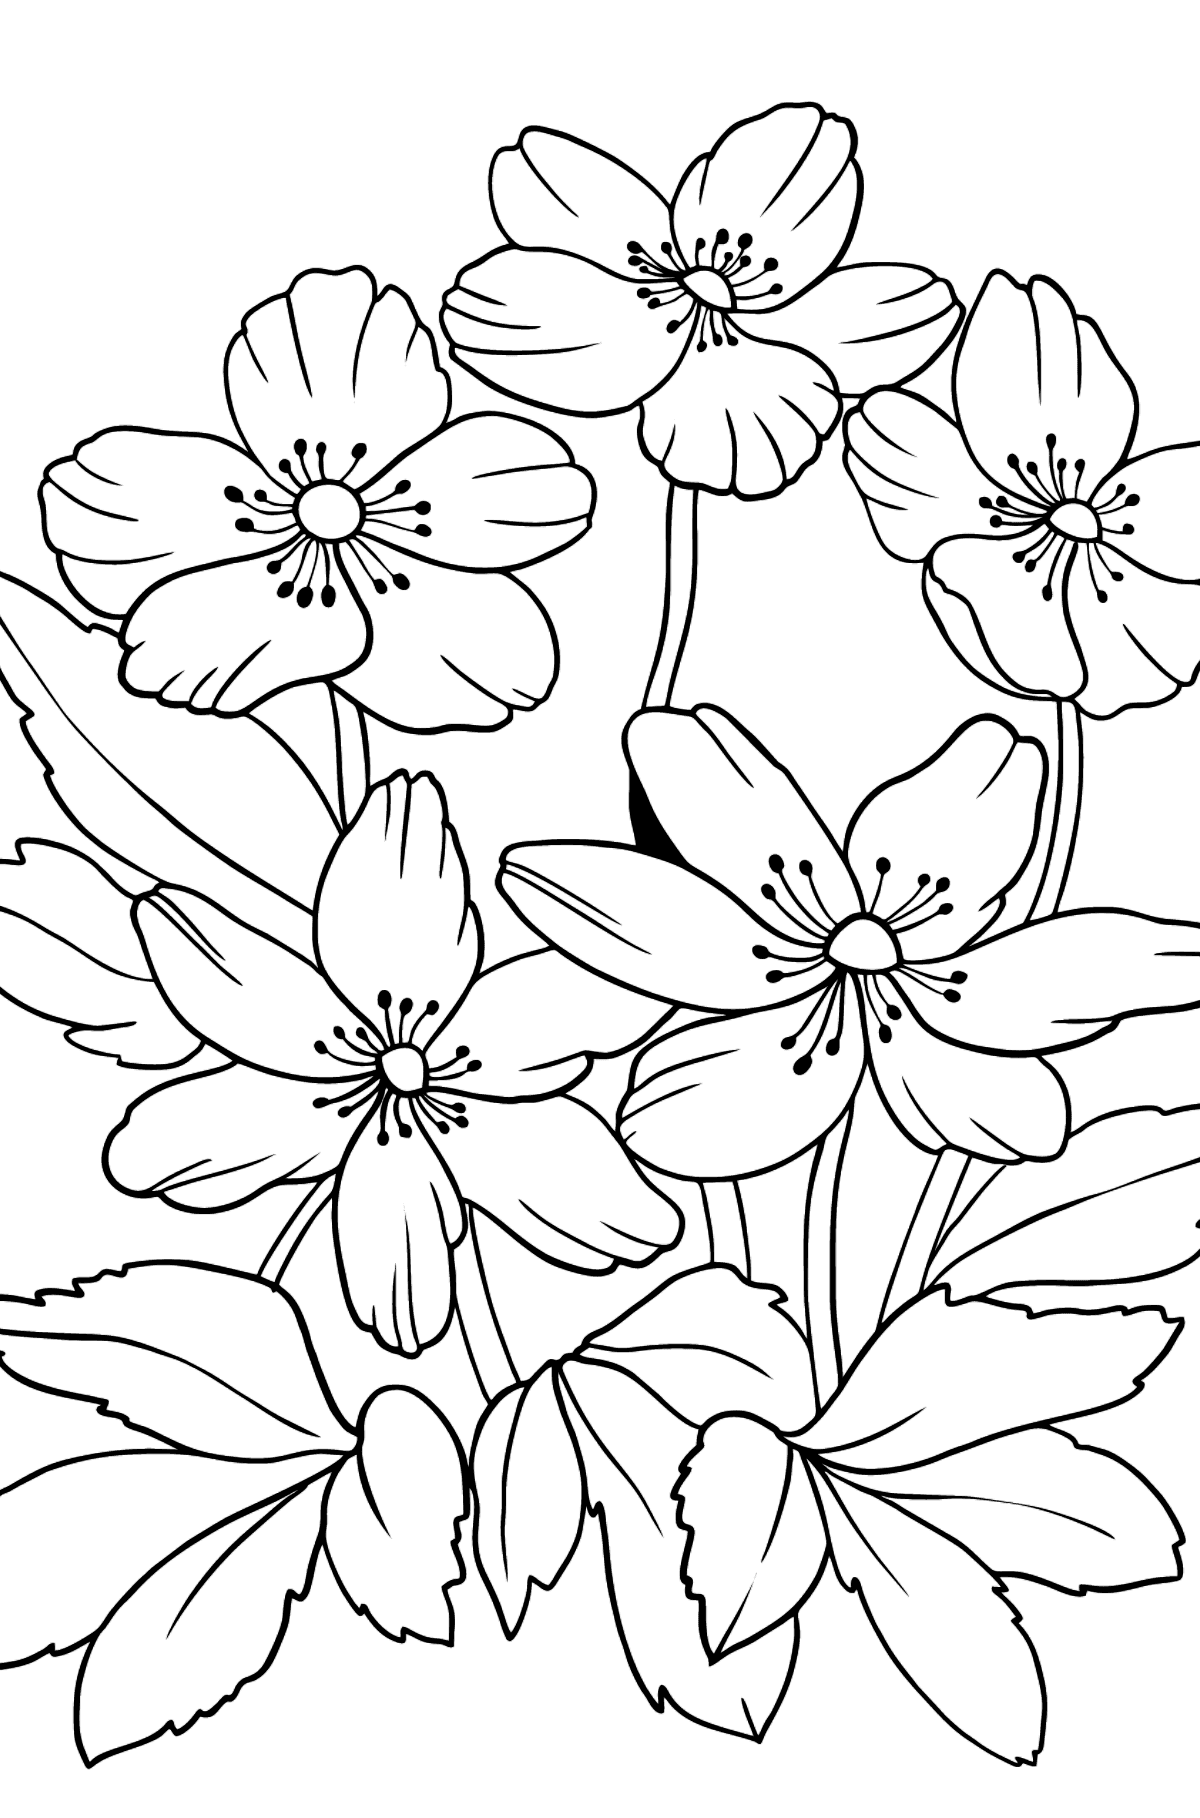 Yellow Windflower Coloring Page  - Coloring Pages for Kids